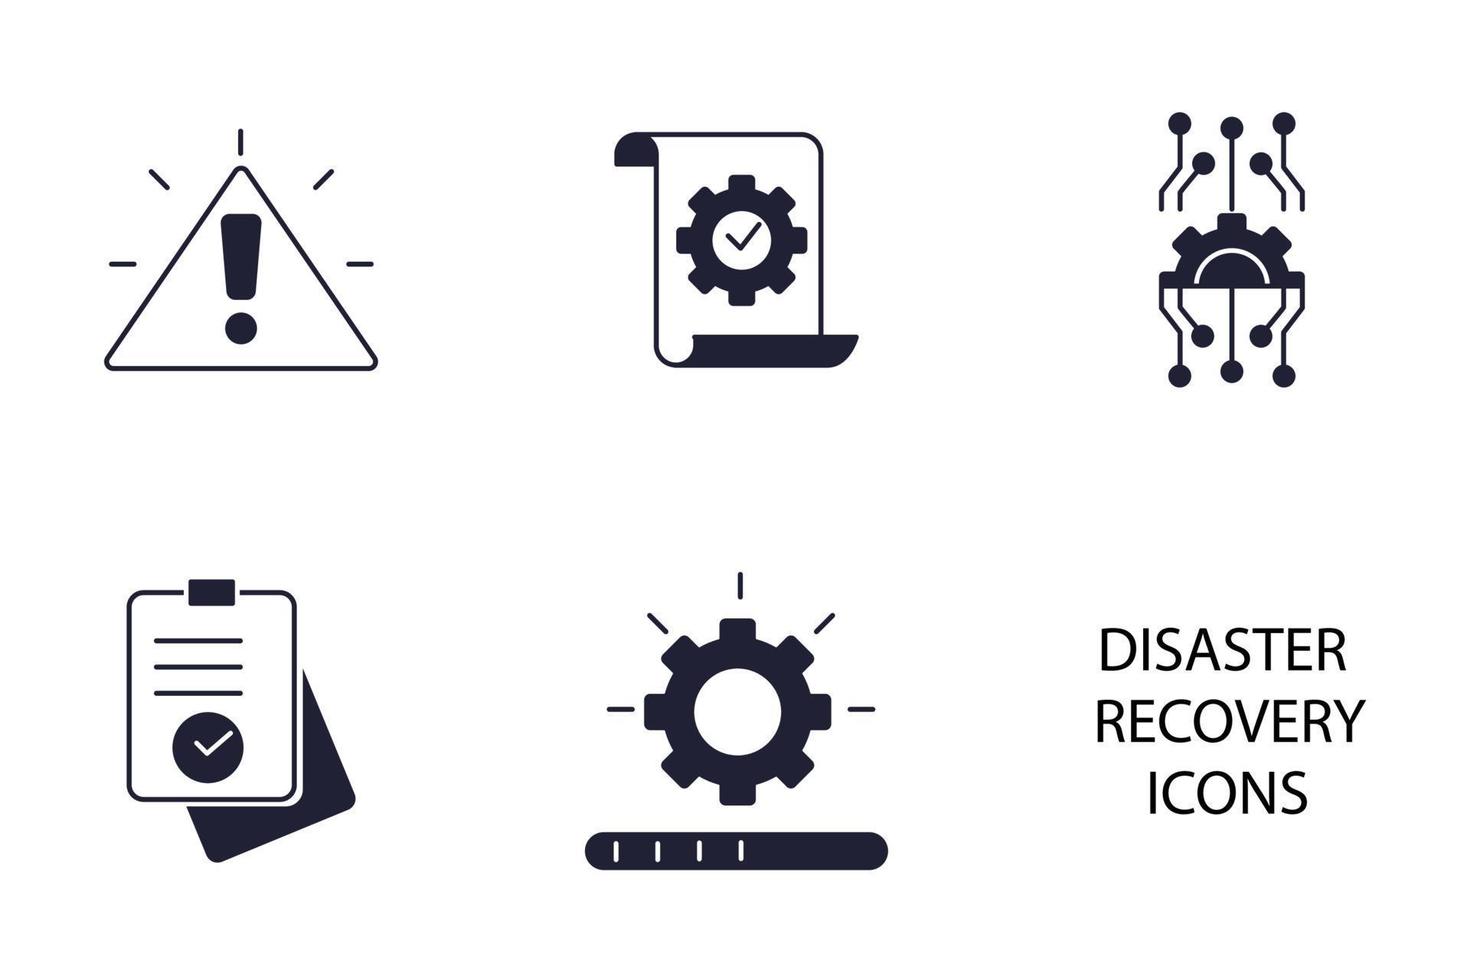 Disaster Recovery icons  symbol vector elements for infographic web